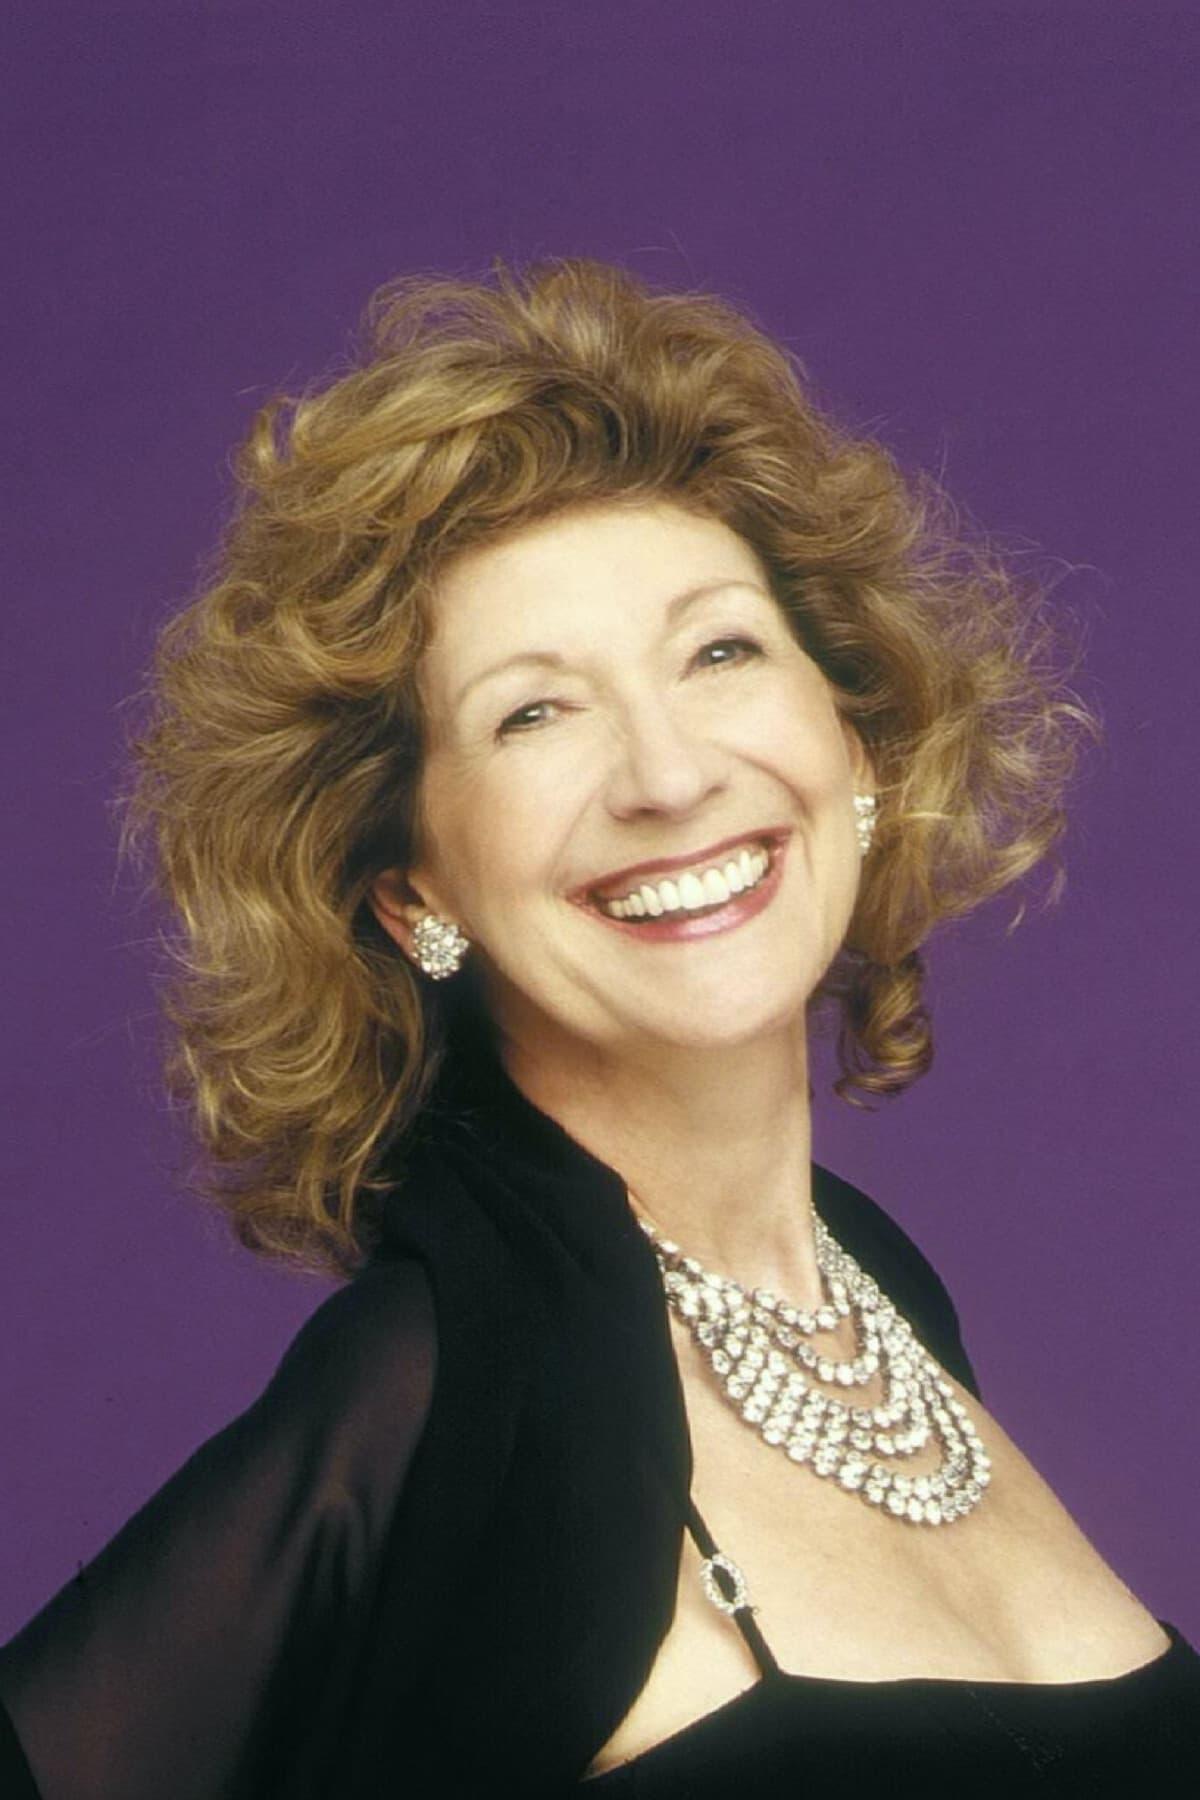 Felicity Lott | Countess in 'The Marriage of Figaro' (singing voice) (uncredited)